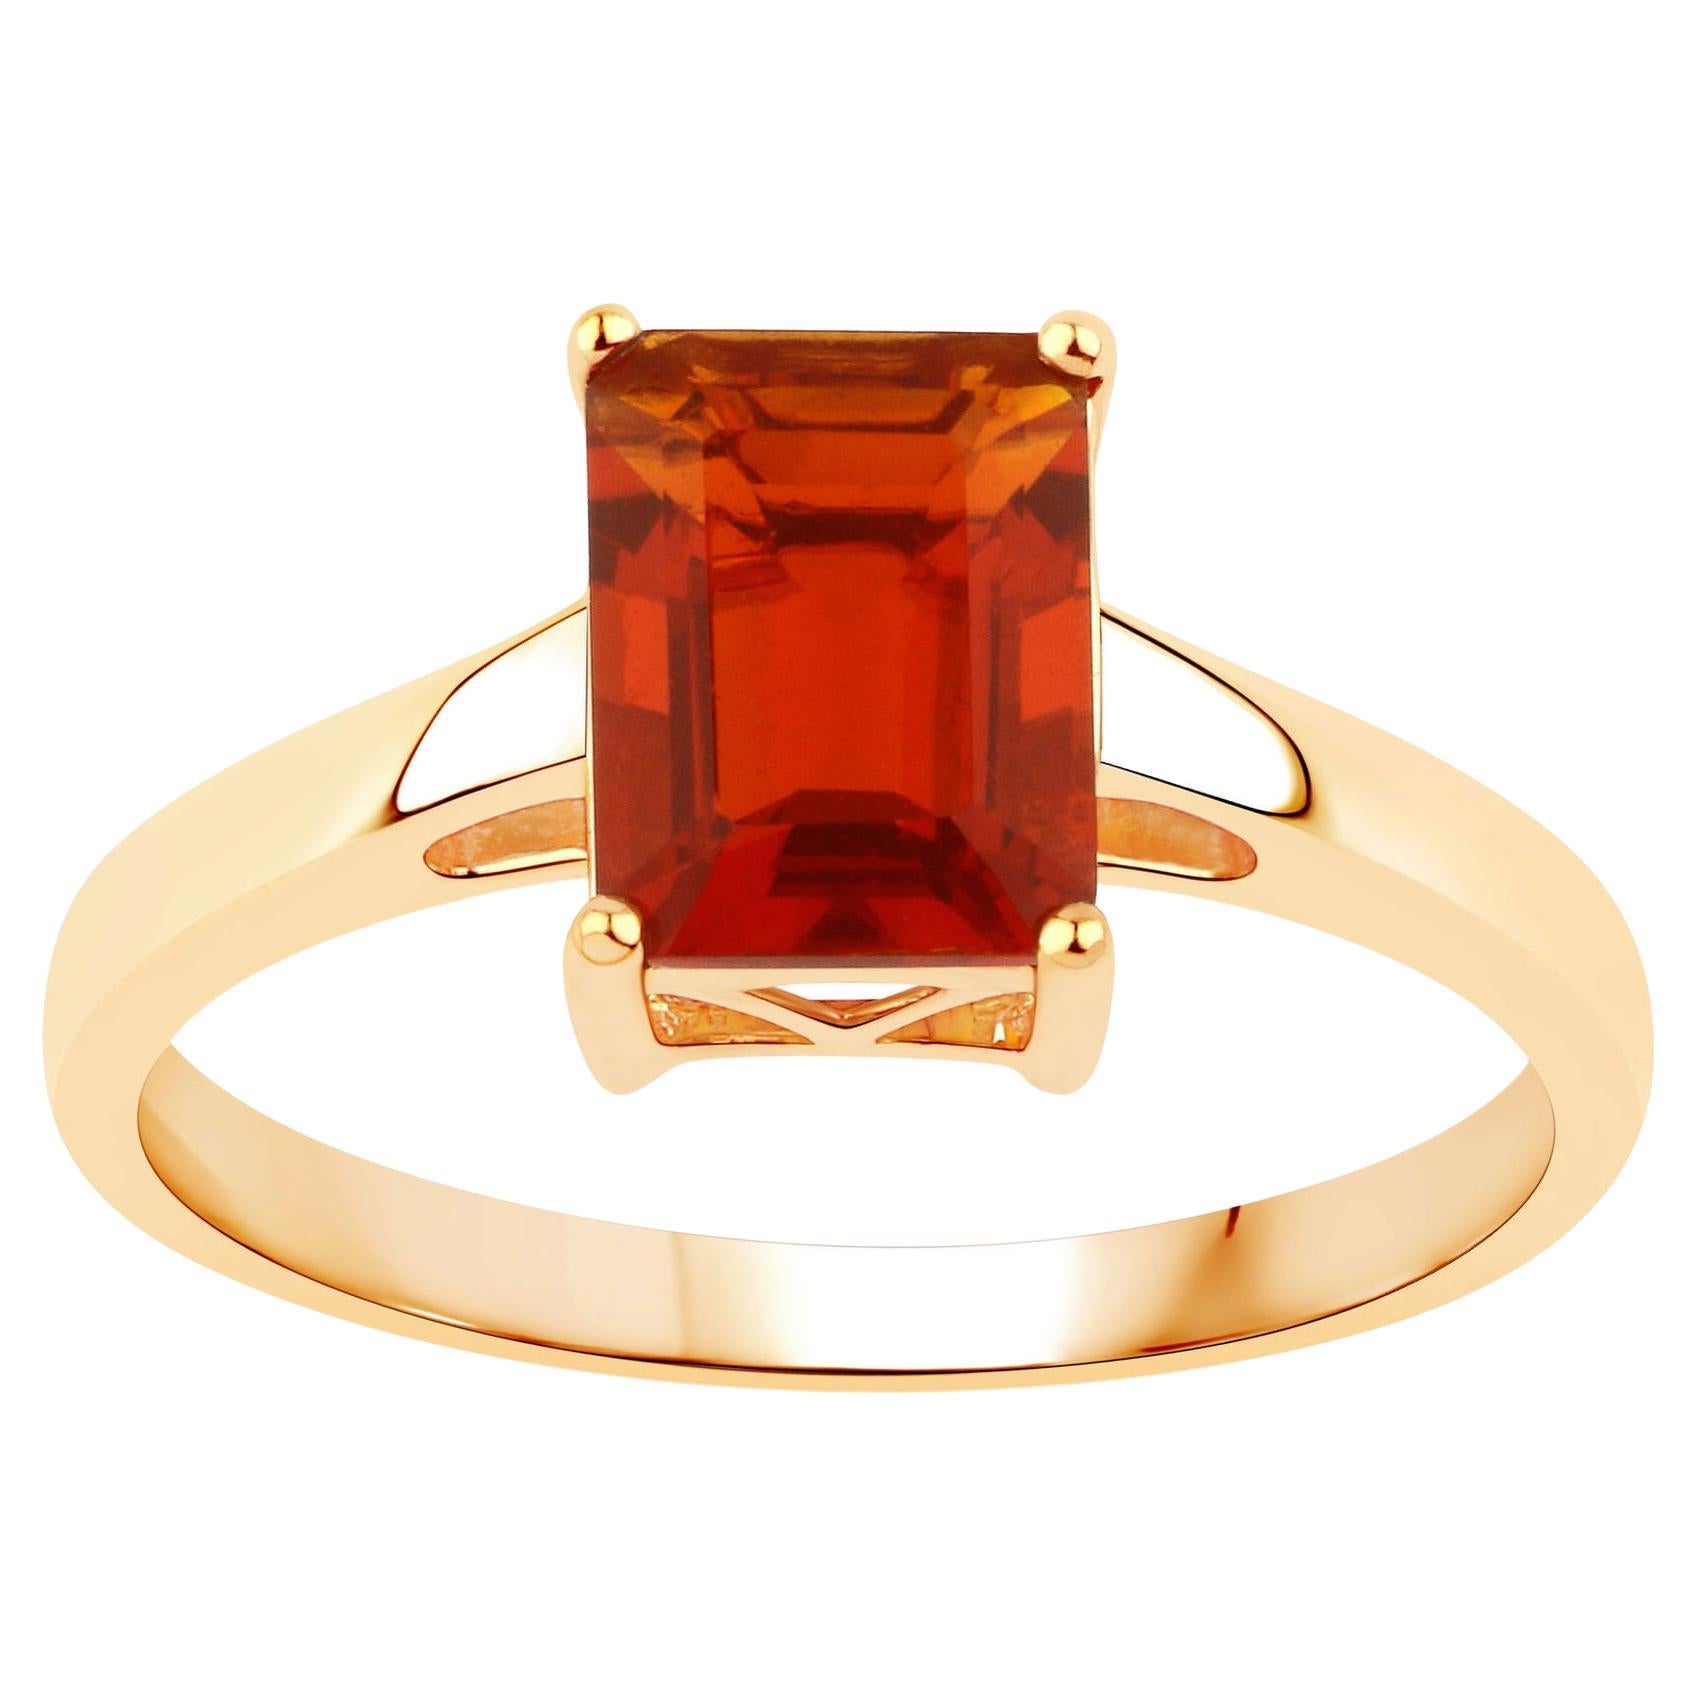 Natural 1.02 Carat Fire Opal Solitaire Ring 14K Yellow Gold